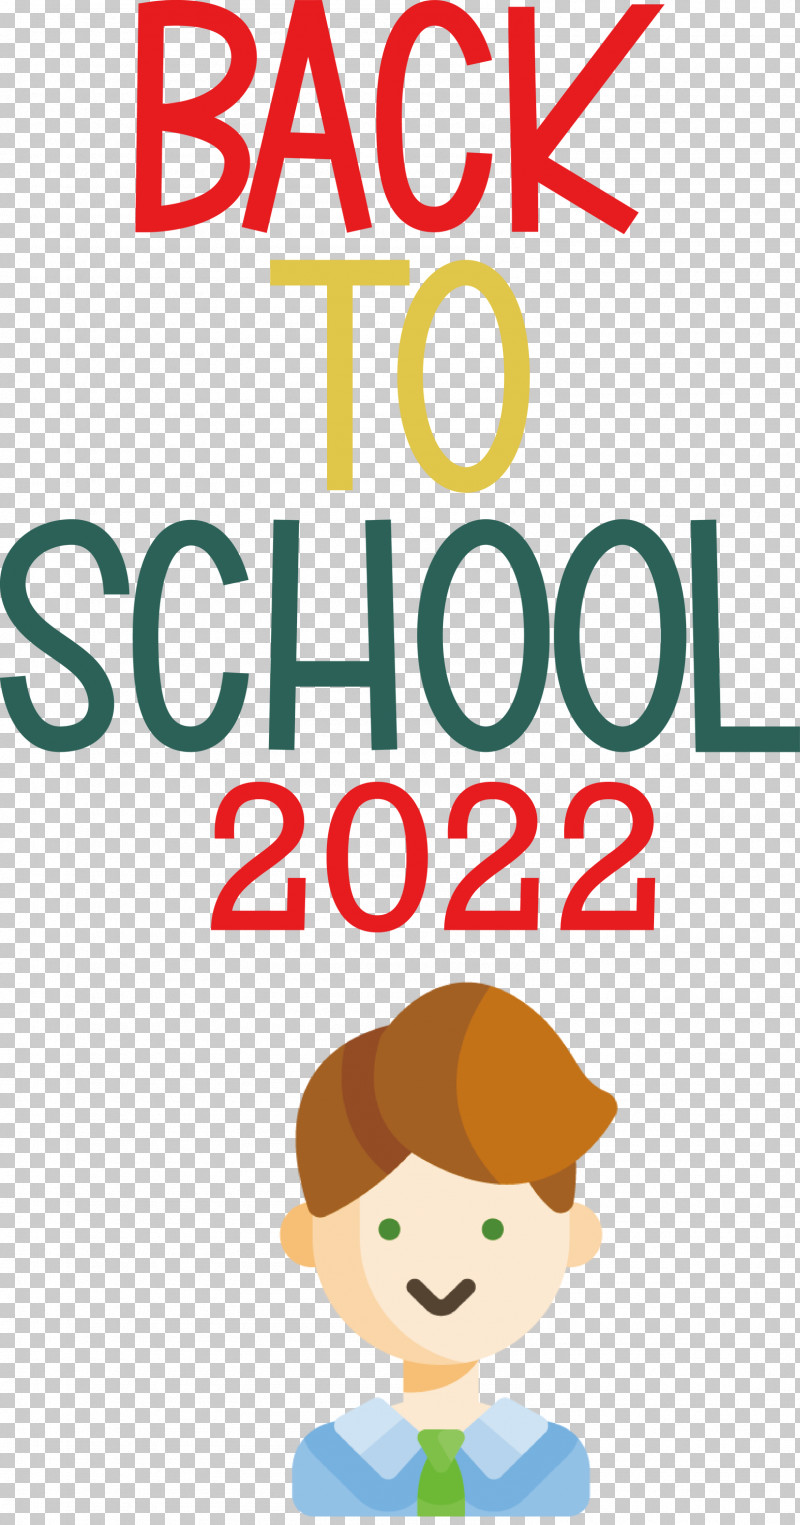 Back To School Back To School 2022 PNG, Clipart, Back To School, Behavior, Cartoon, Conversation, Geometry Free PNG Download